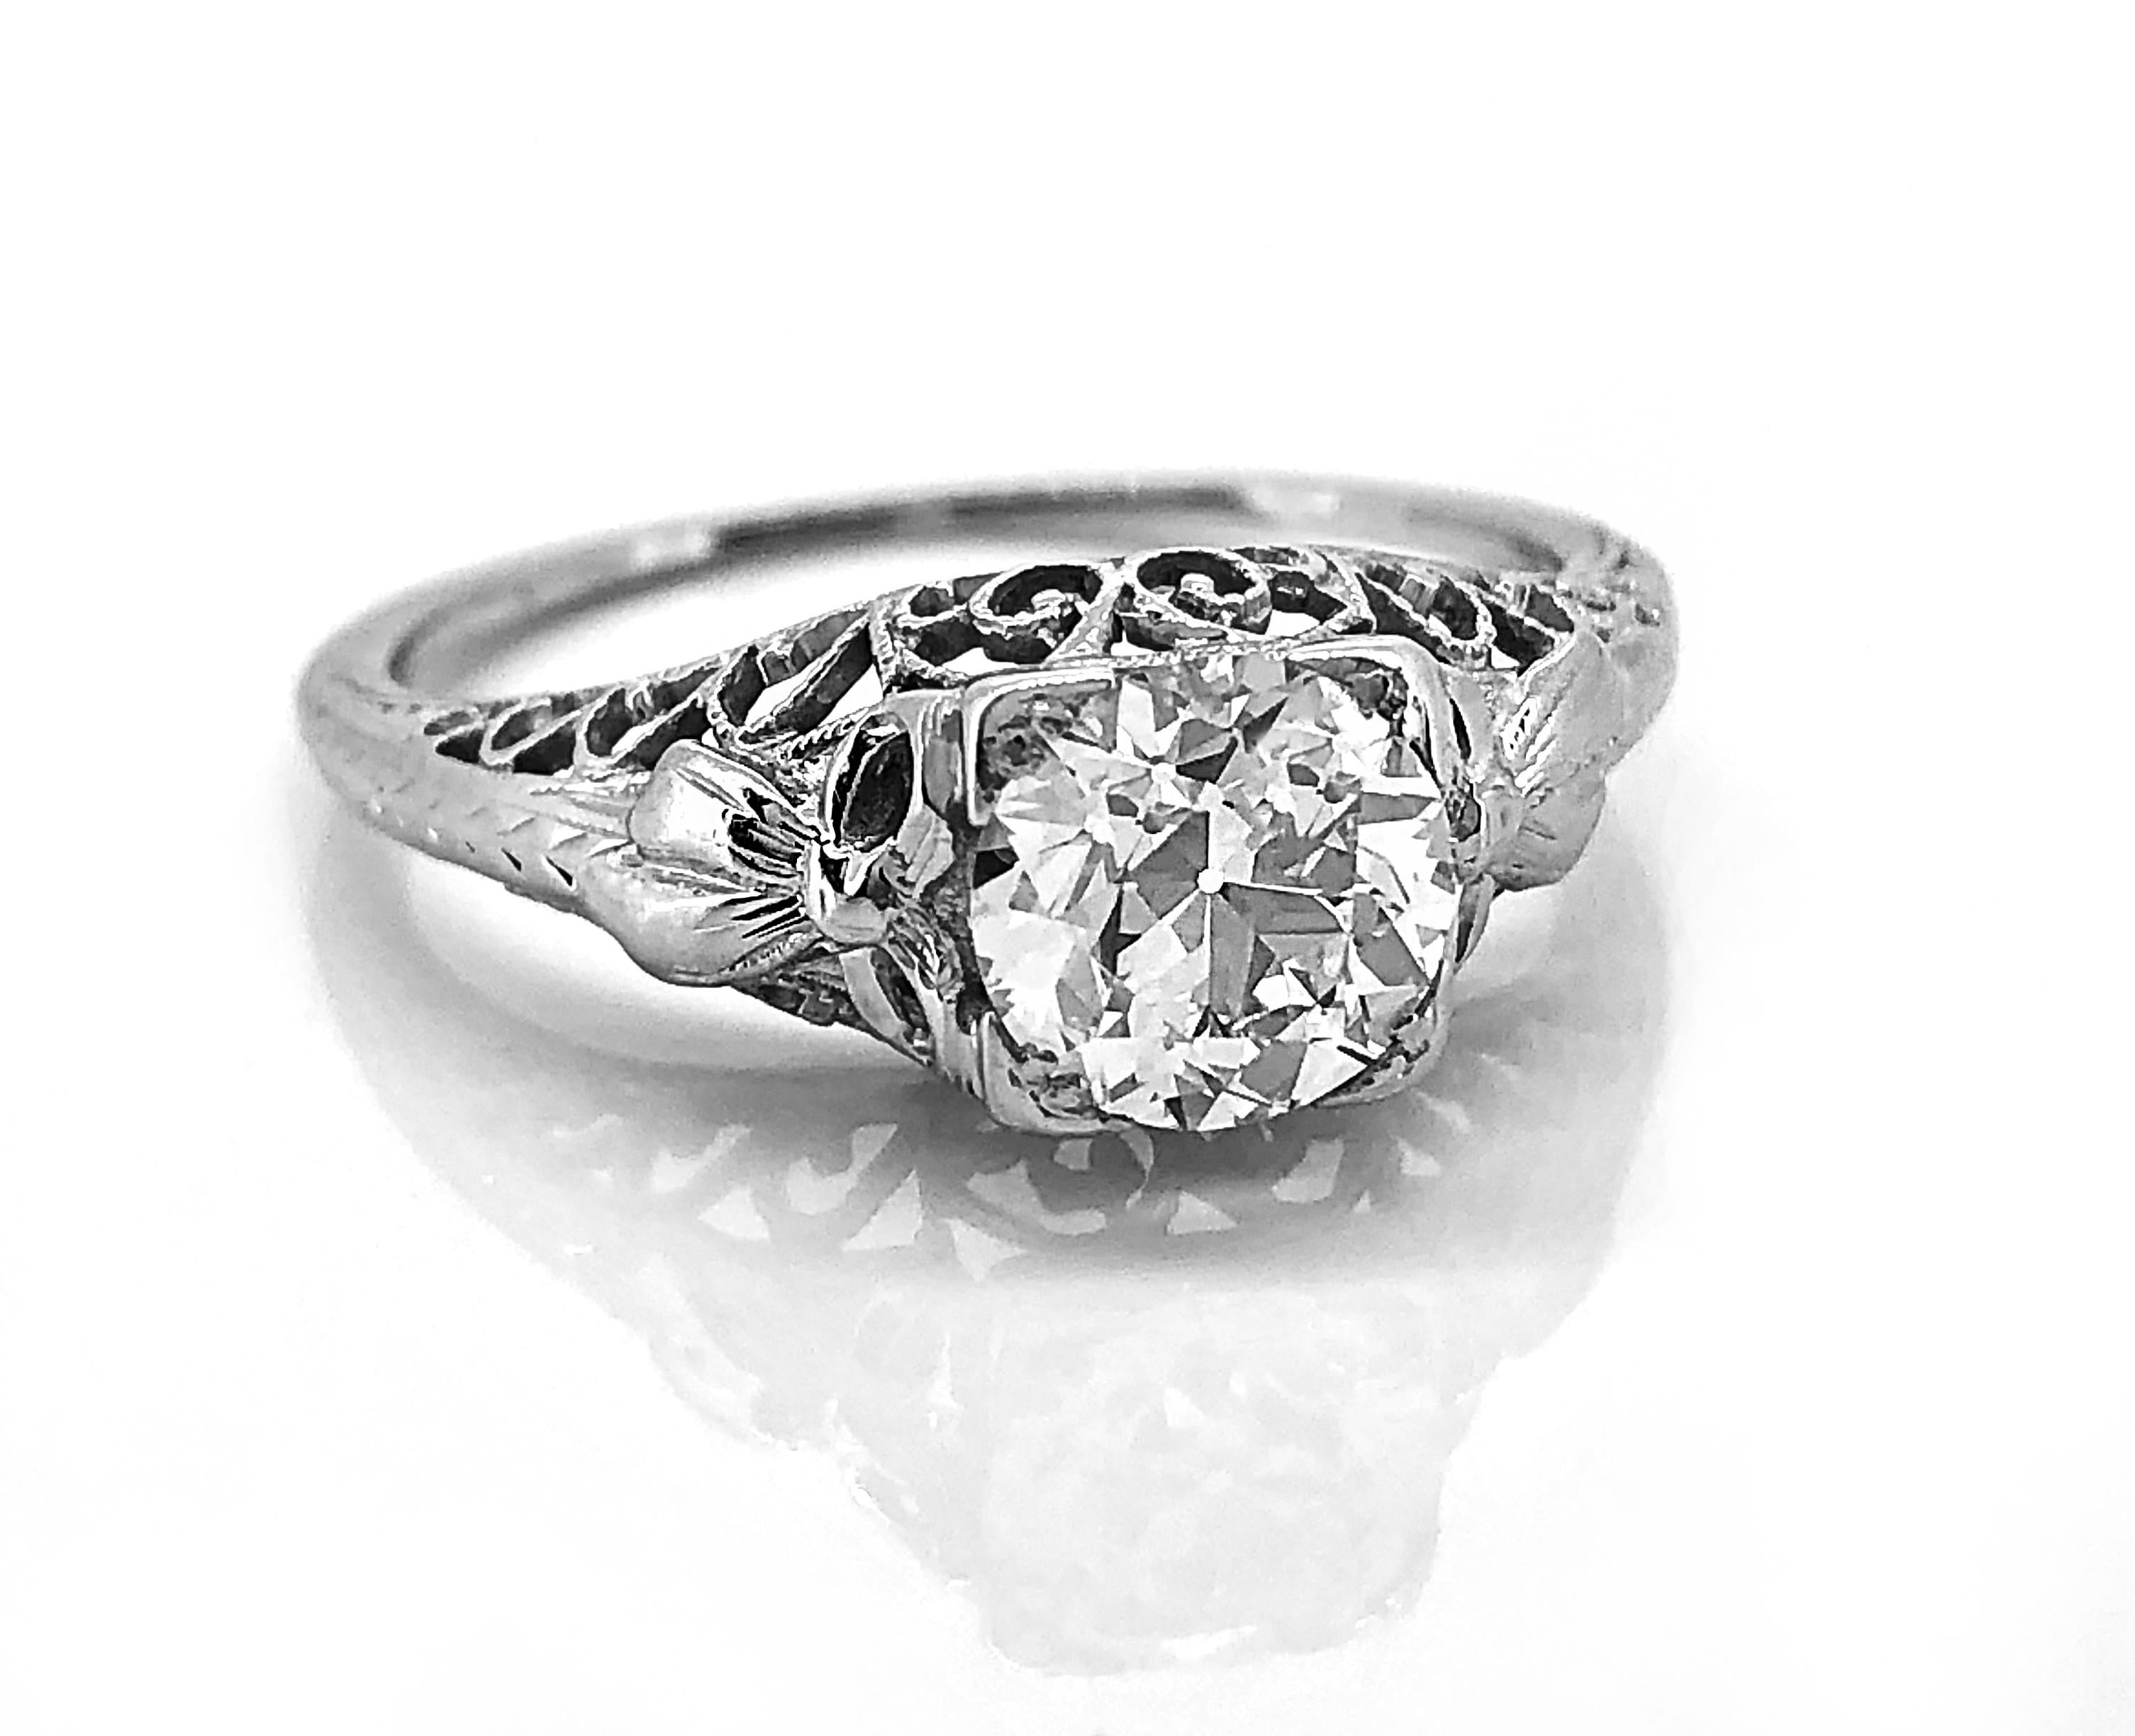 A decorative Edwardian diamond Antique engagement ring crafted in 18K white gold that features a 1.07ct. apx. European cut center diamond with VS2 clarity and H color. The mounting has been brilliantly filigreed and is also delicately engraved. This